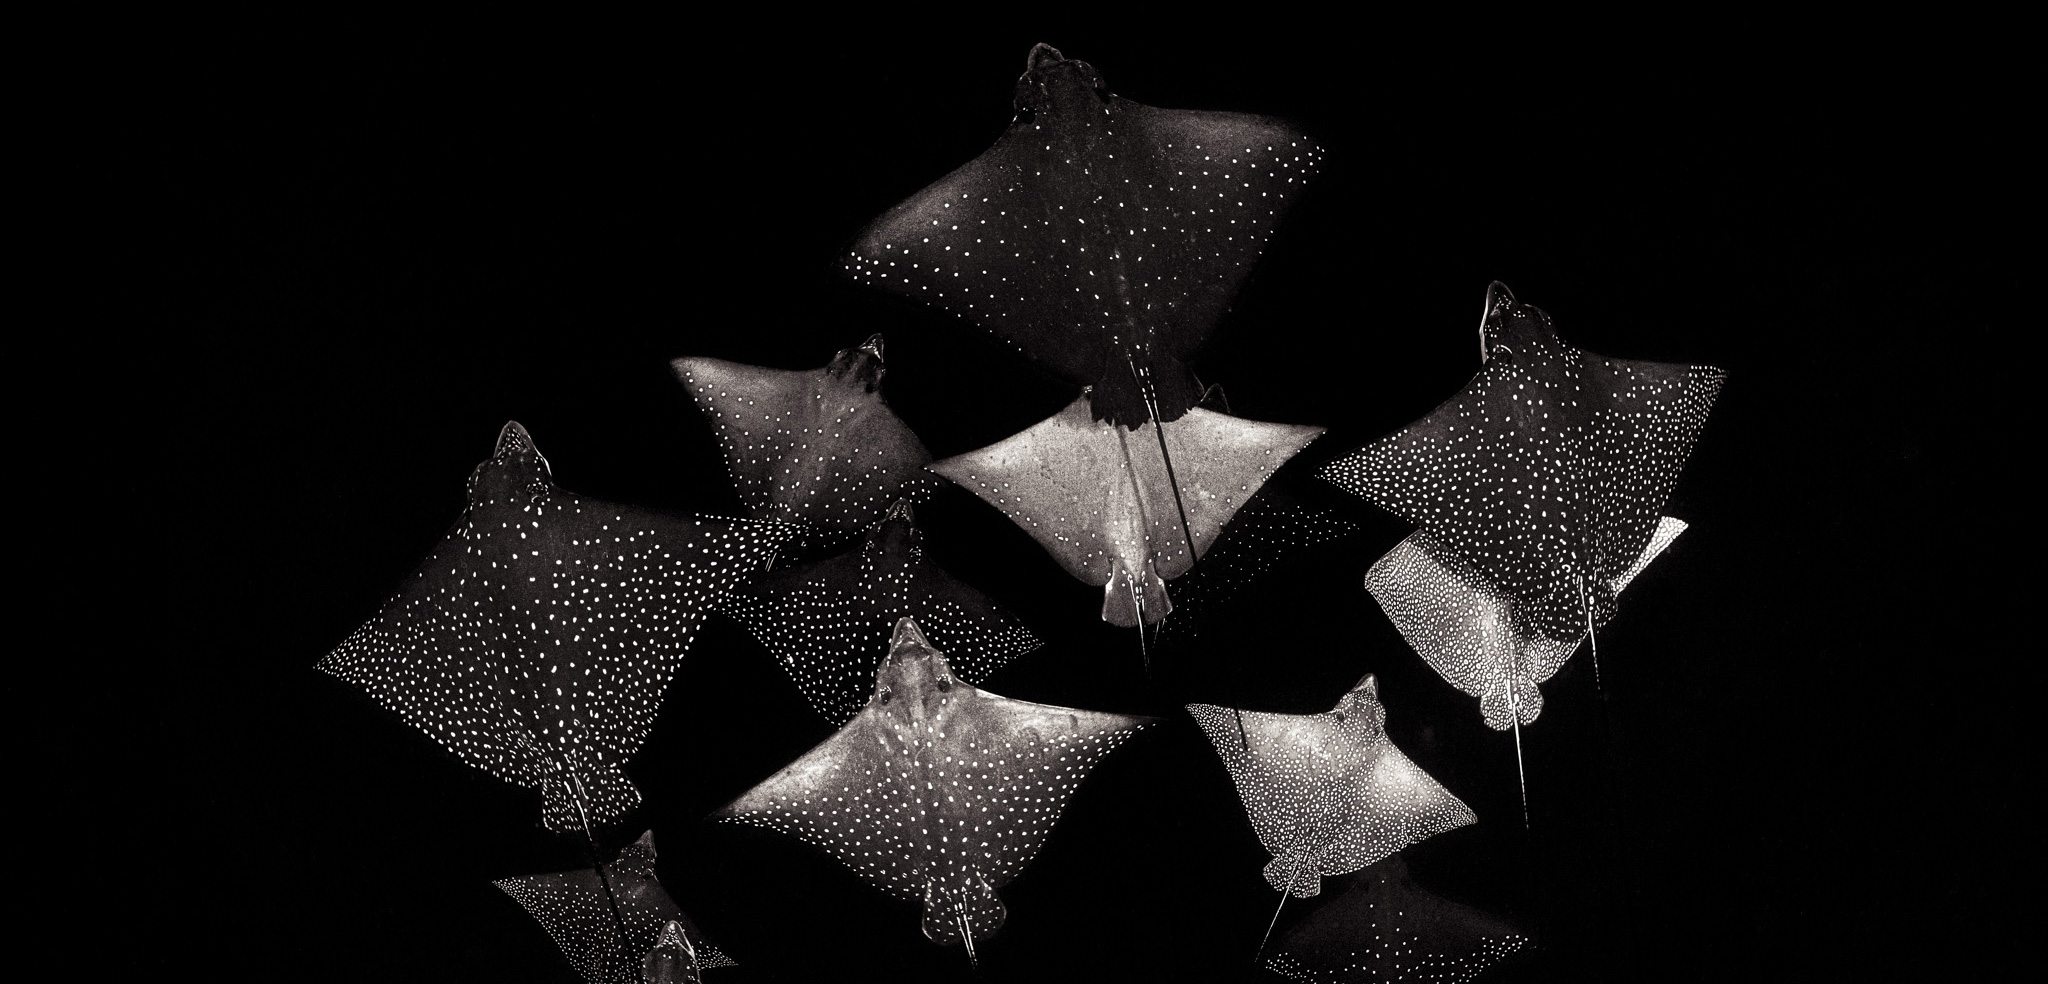 spotted eagle rays